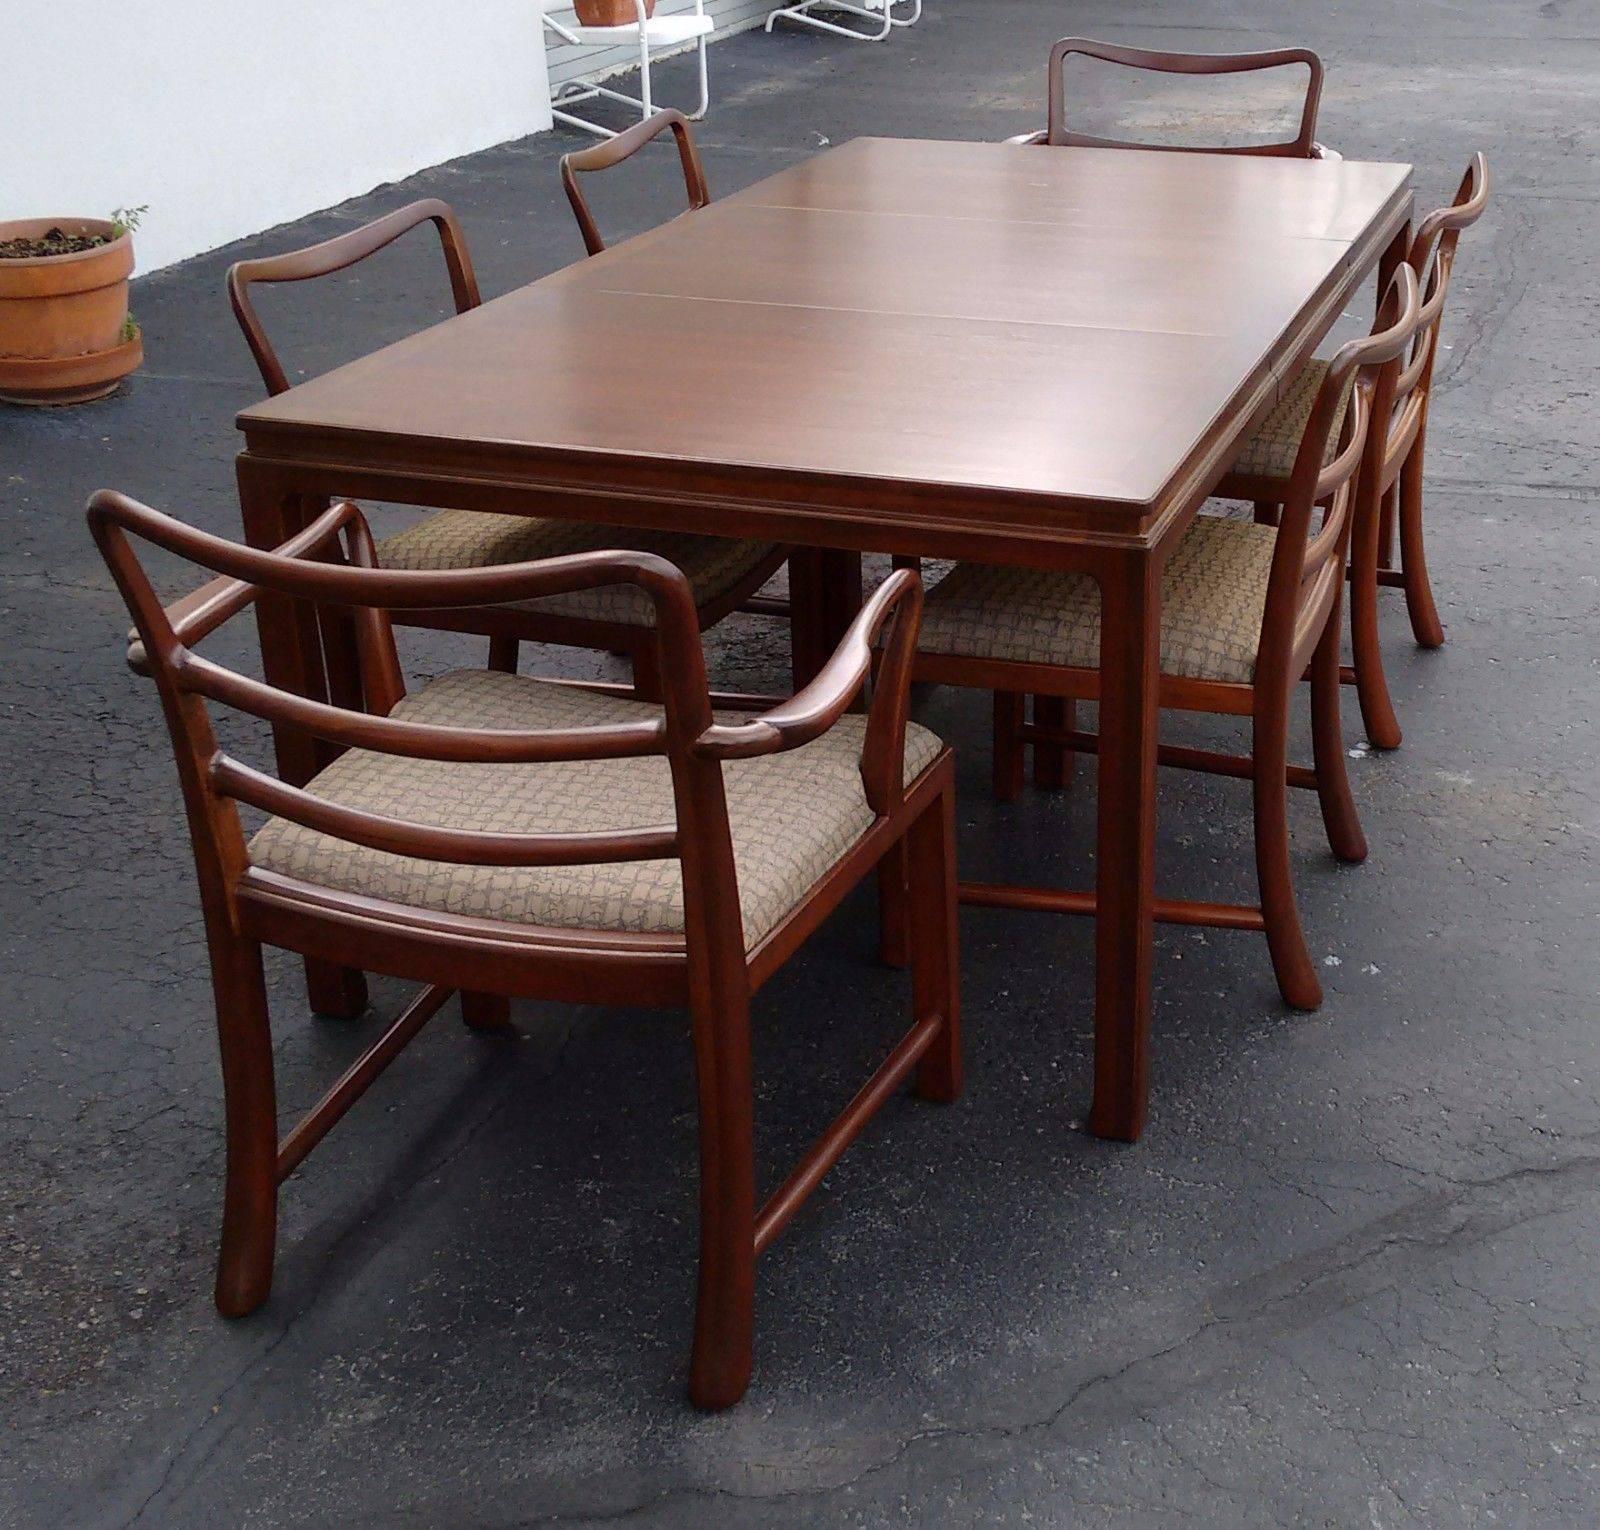 American Mid-Century Modern Brown Mahogany Dunbar Extendable Dining Table and Six Chairs